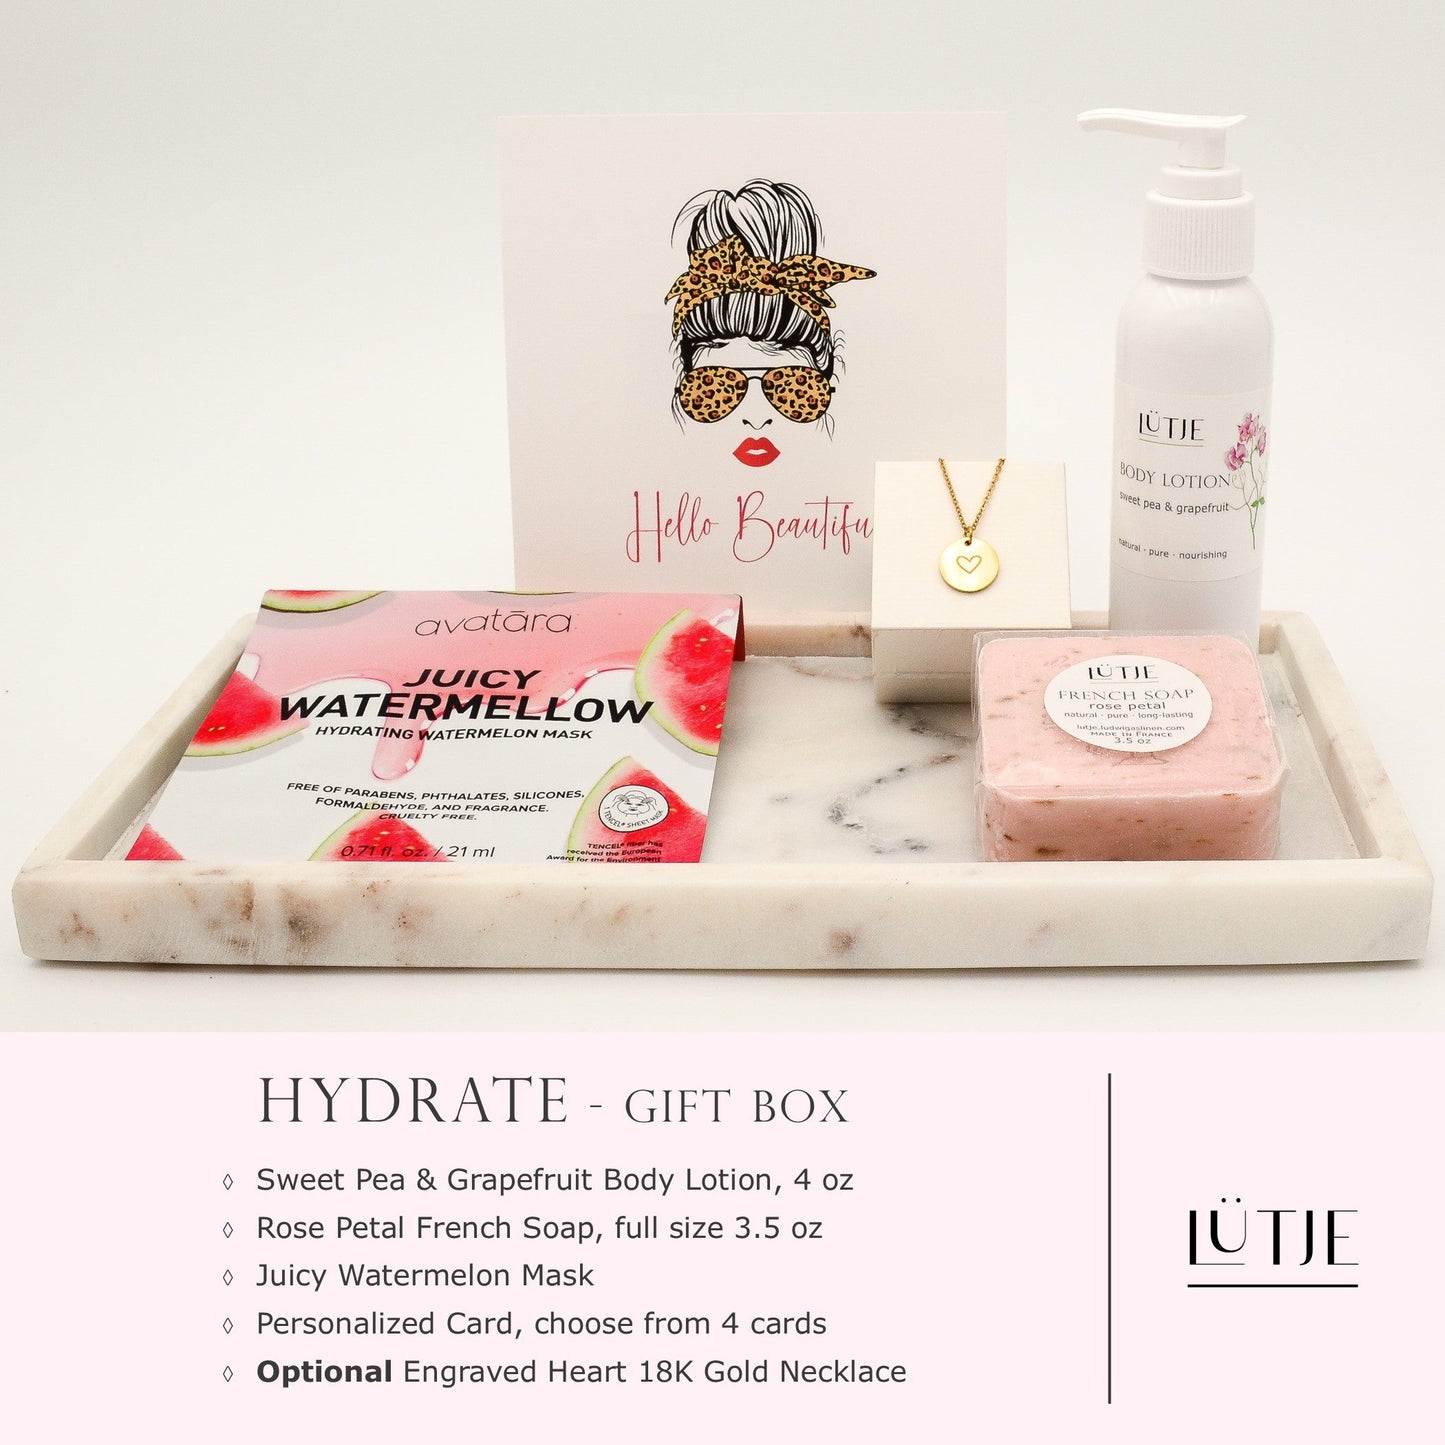 Hydrate Gift Box for women, daughter, mom, BFF, wife, sister or grandma, includes Sweet Pea & Grapefruit body lotion, French soap, hydrating face mask, and 18K gold-plated necklace with engraved heart.